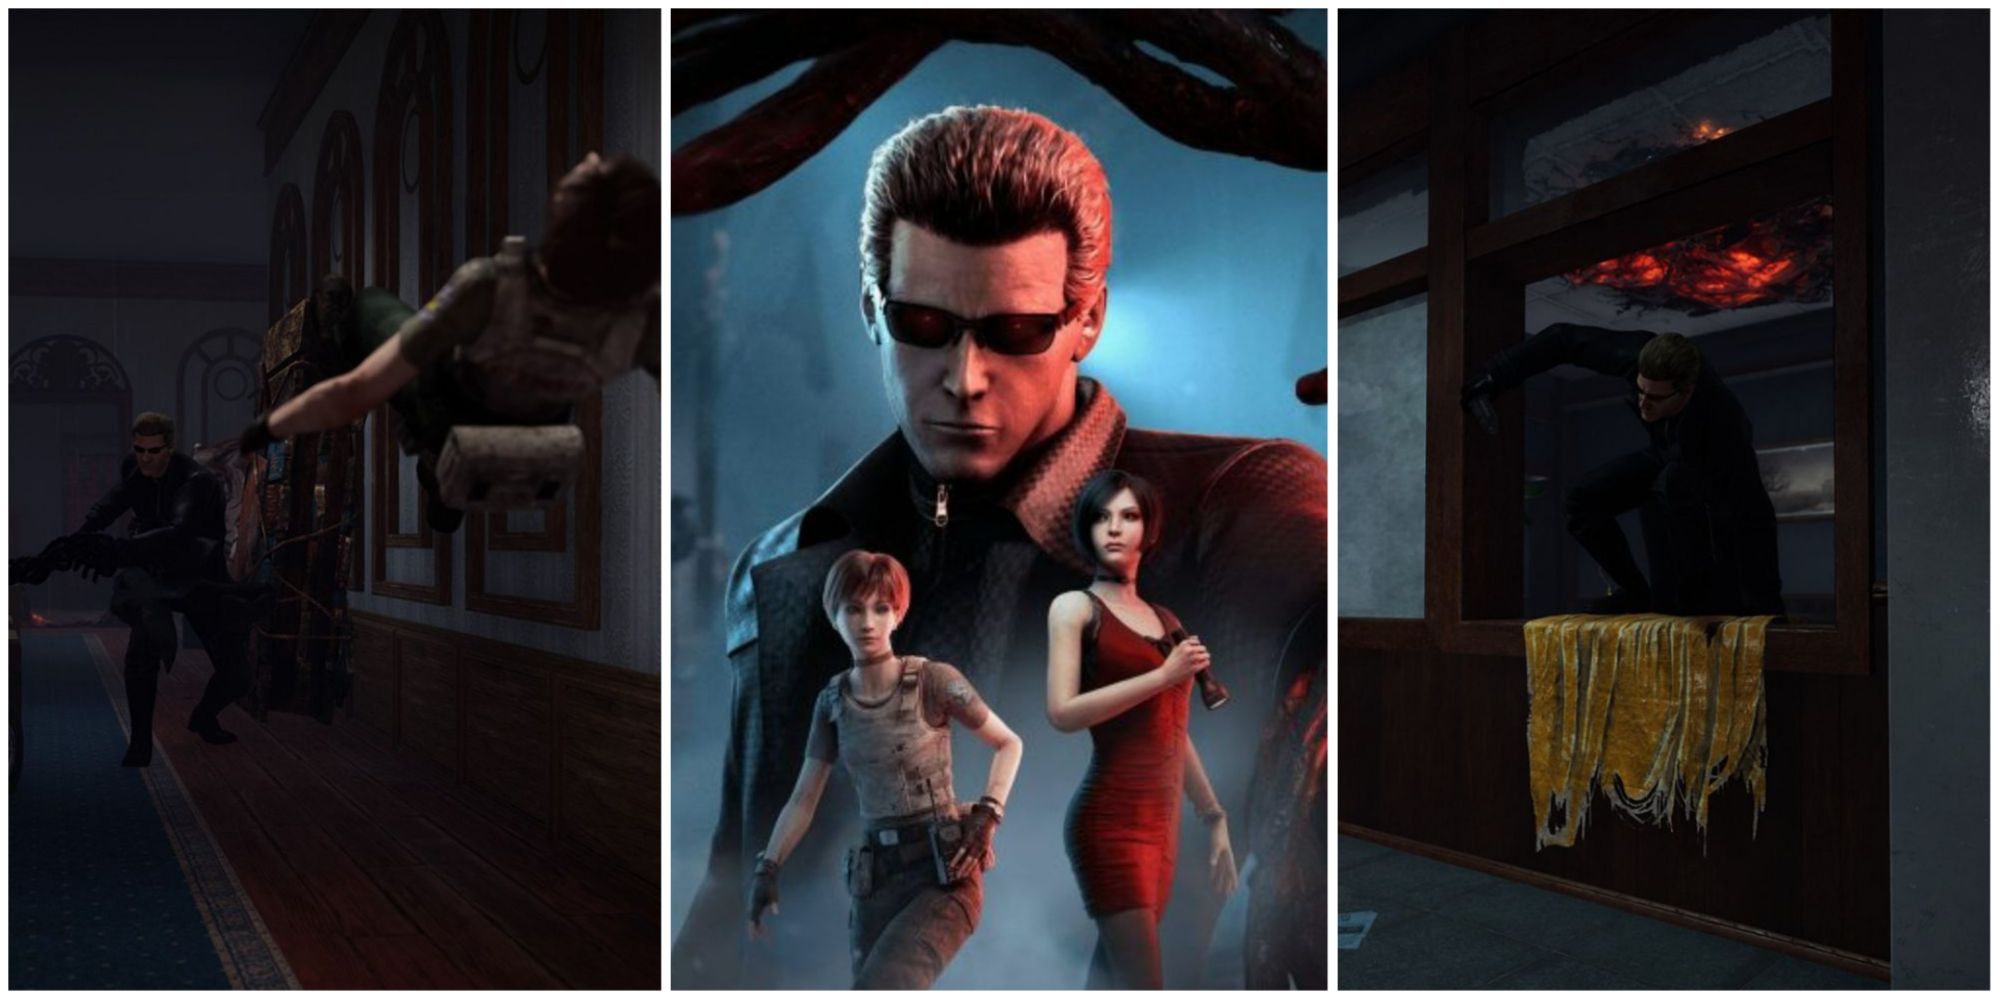 Split Image featuring Albert Wesker throwing Rebecca Chambers, Project W key art, and vaulting